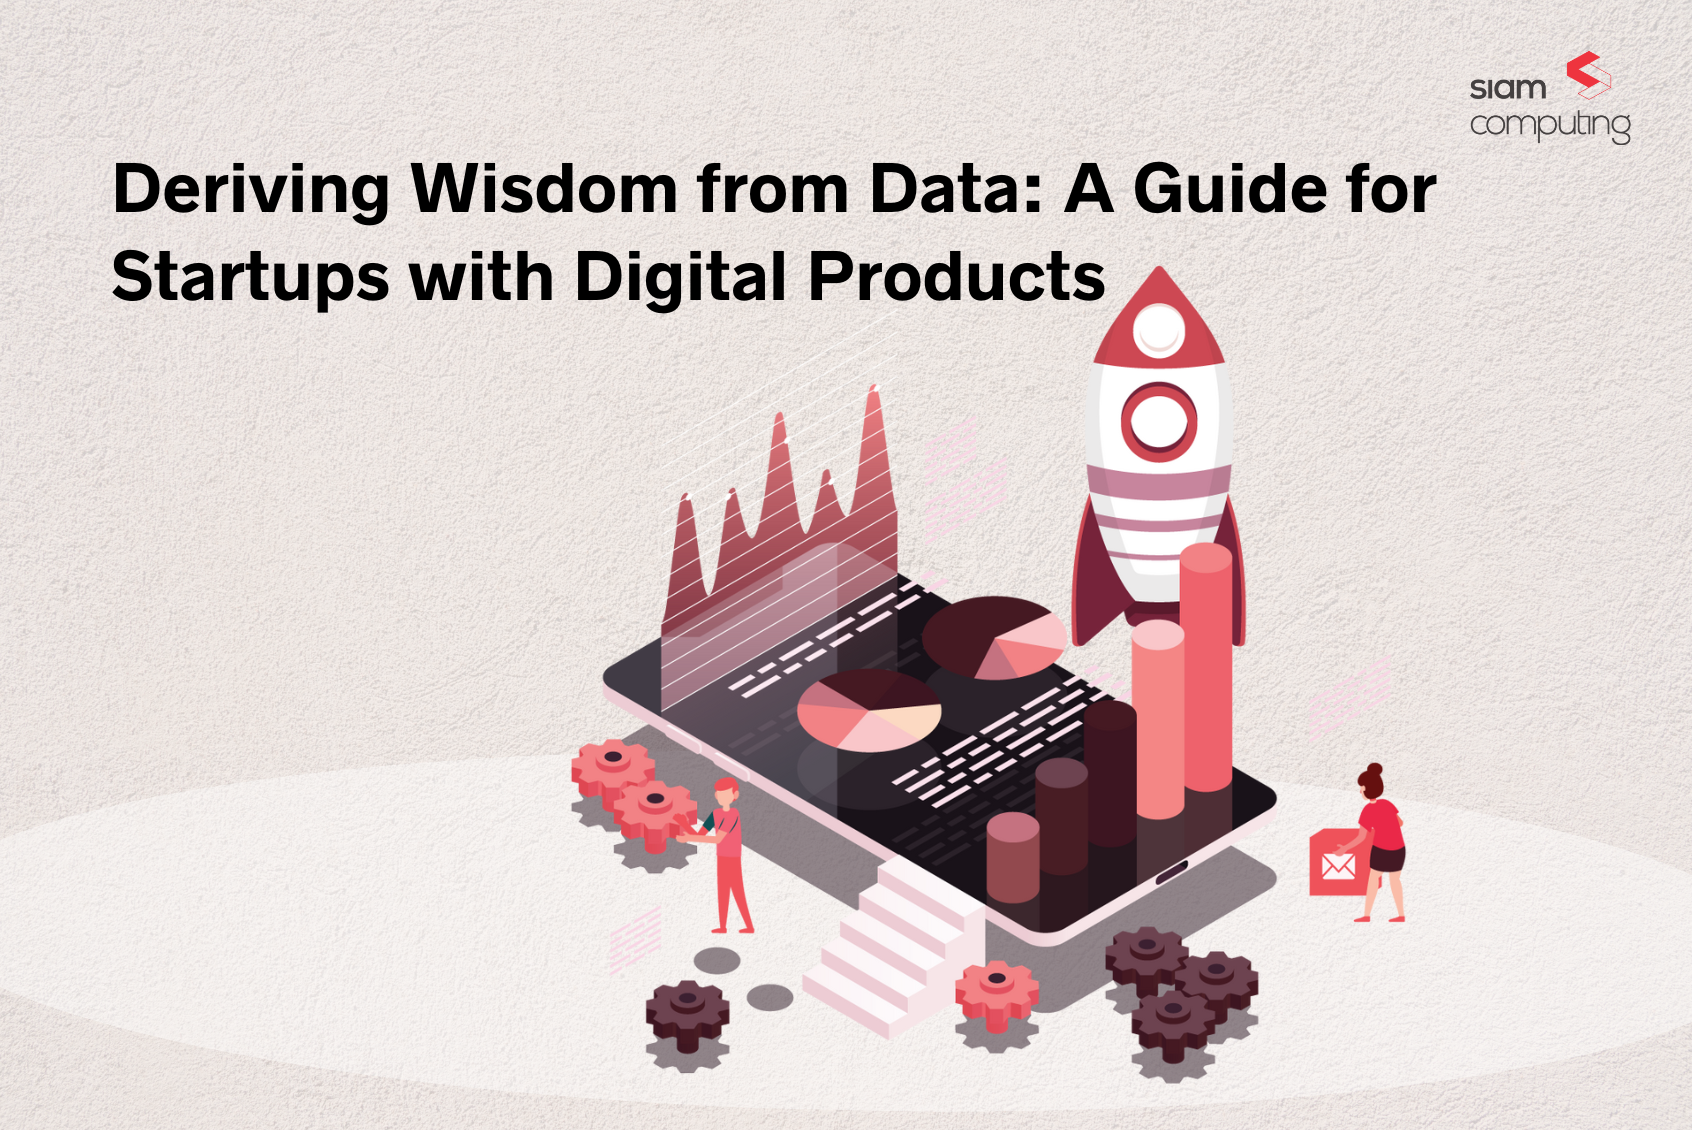 Deriving Wisdom from Data: A Guide for Startups with Digital Products